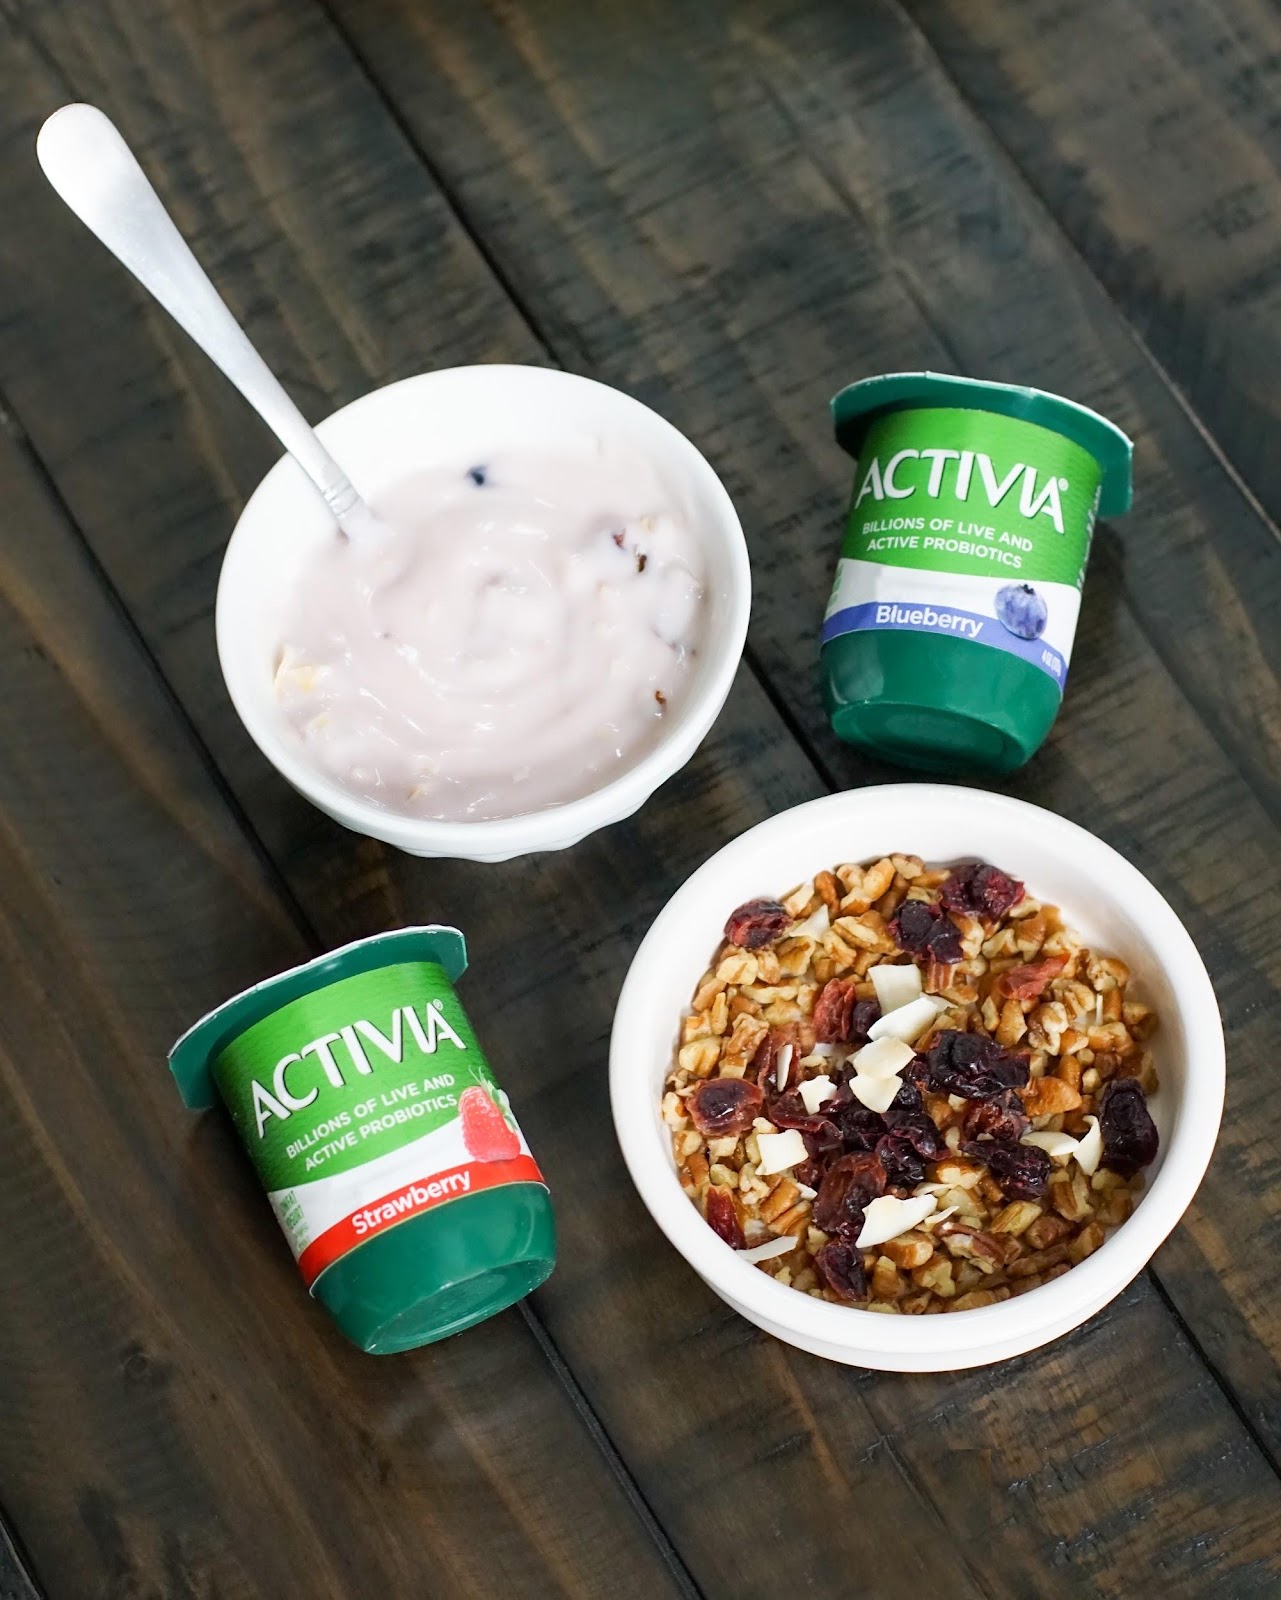 Try This Easy Probiotic Parfait for Immunity & Gut Health - Activia